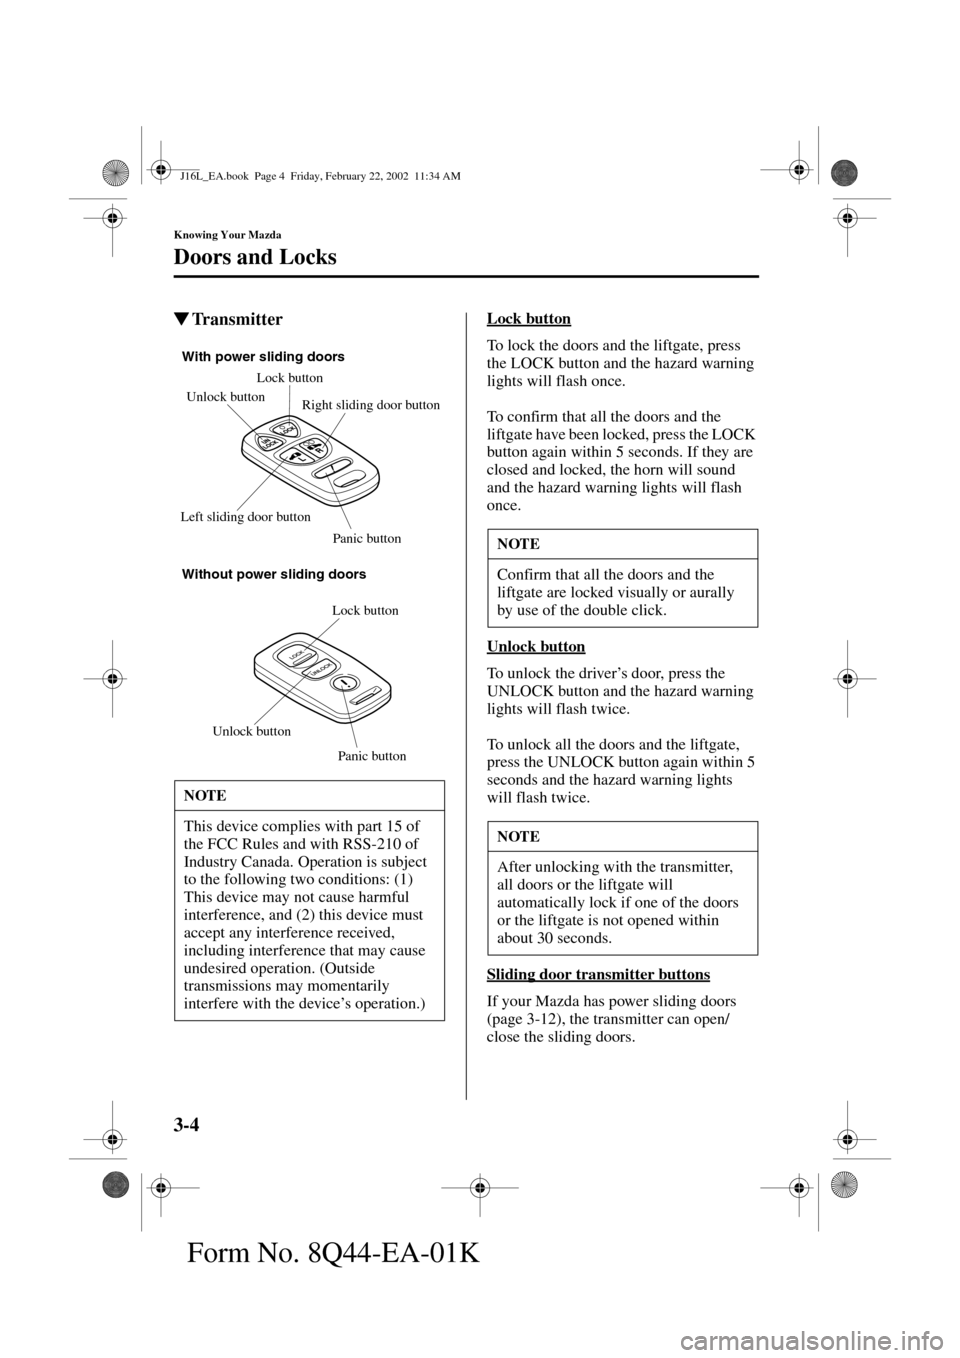 MAZDA MODEL MPV 2002  Owners Manual (in English) 3-4
Knowing Your Mazda
Doors and Locks
Form No. 8Q44-EA-01K
TransmitterLock button
To lock the doors and the liftgate, press 
the LOCK button and the hazard warning 
lights will flash once.
To confir